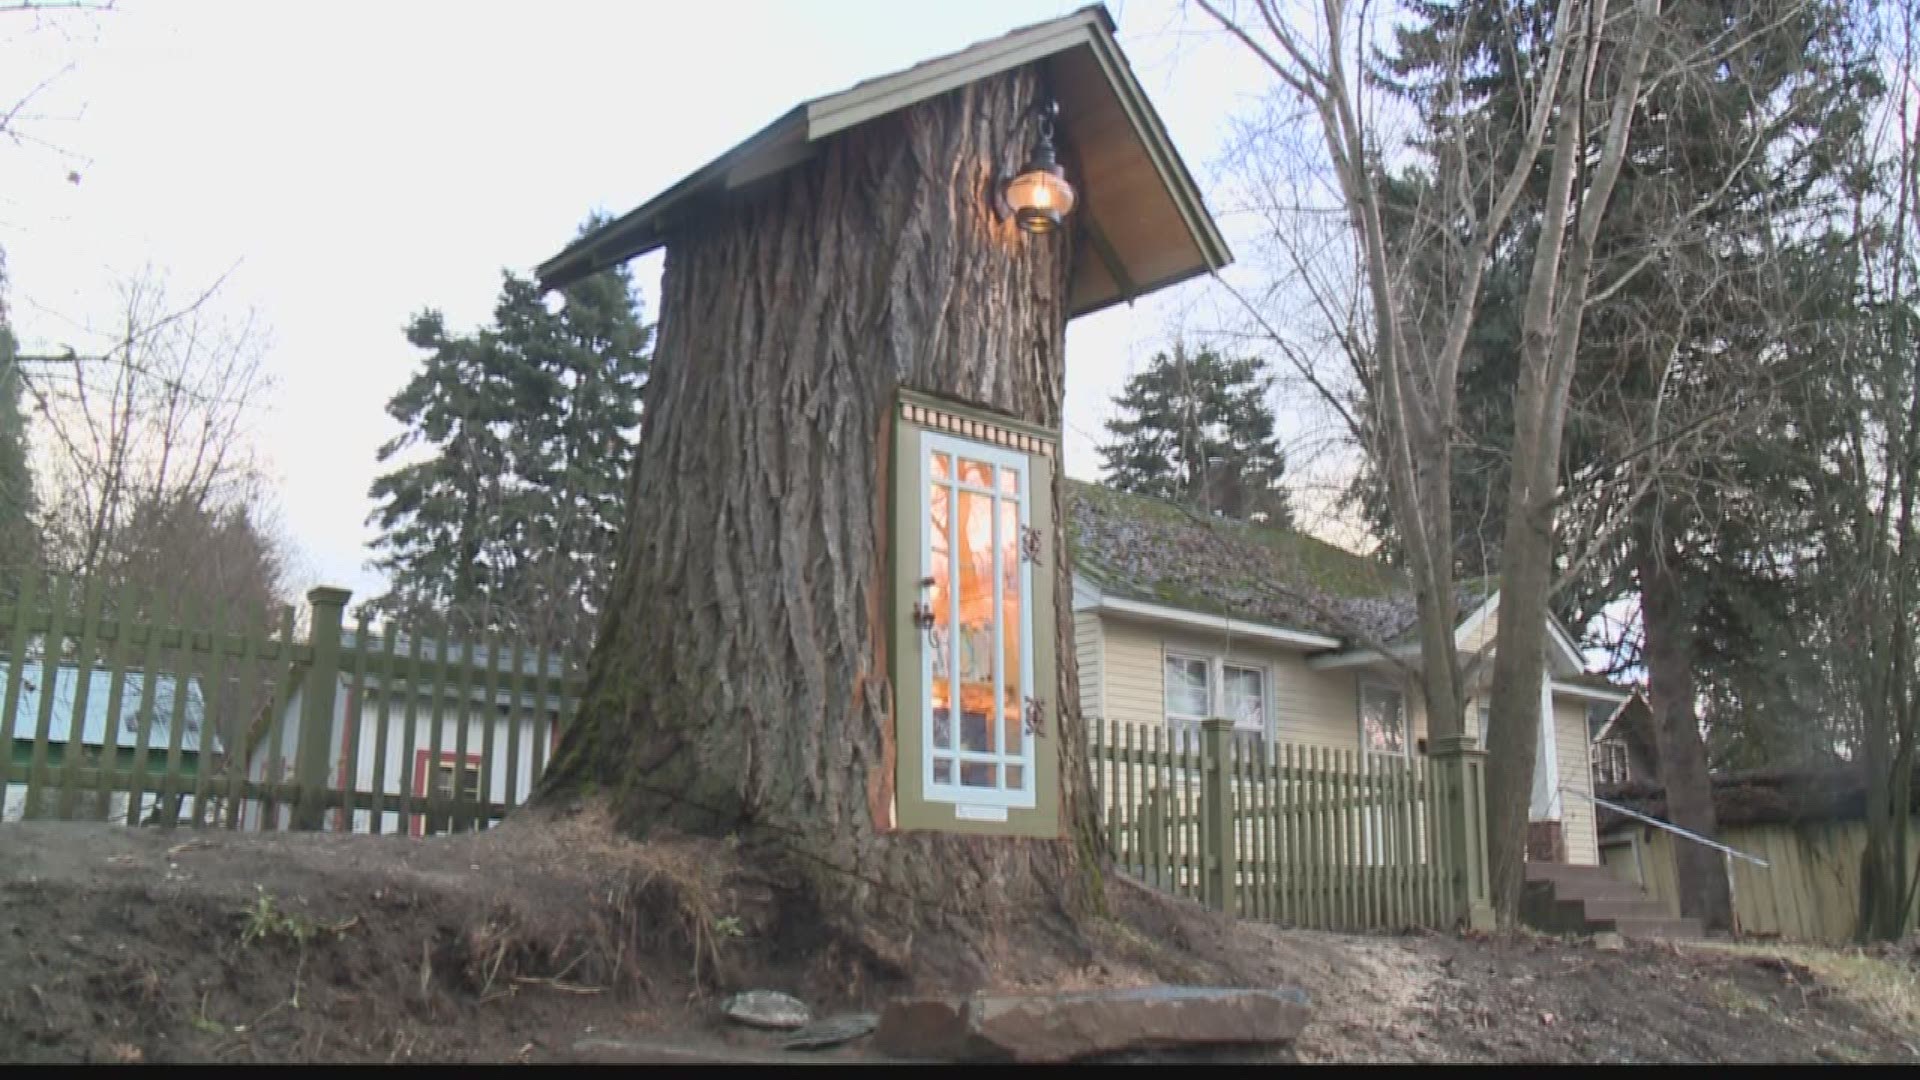 The artist, Sharalee Armitage Howard, created a “little free library” inside a more than 100-year-old cottonwood tree stump outside her home near midtown Coeur d’Alene. A Facebook post about the project from Howard has since been shared close to 30,000 times.